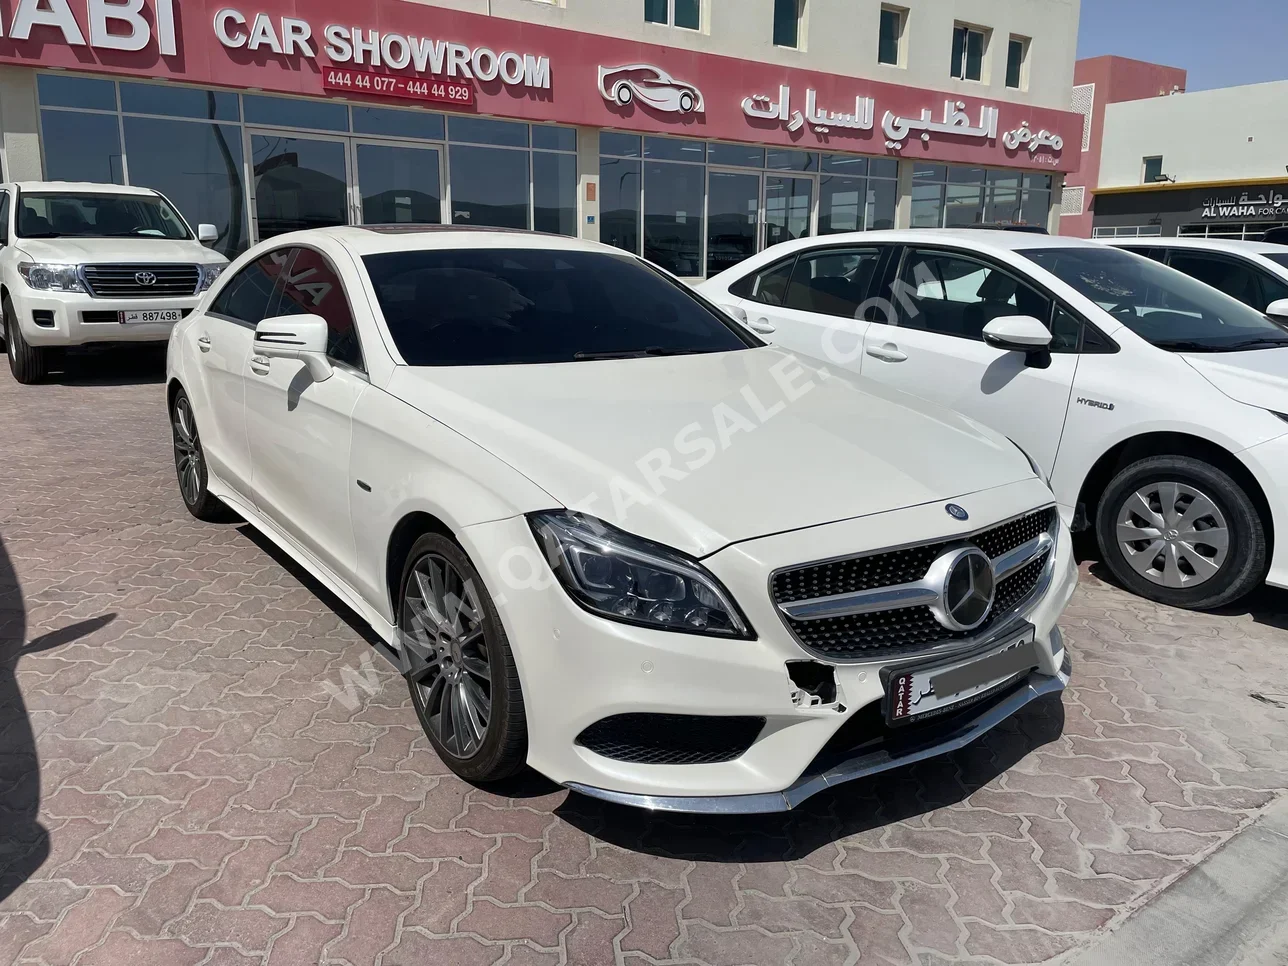 Mercedes-Benz  CLS  500  2014  Automatic  139,000 Km  8 Cylinder  Four Wheel Drive (4WD)  Sedan  White